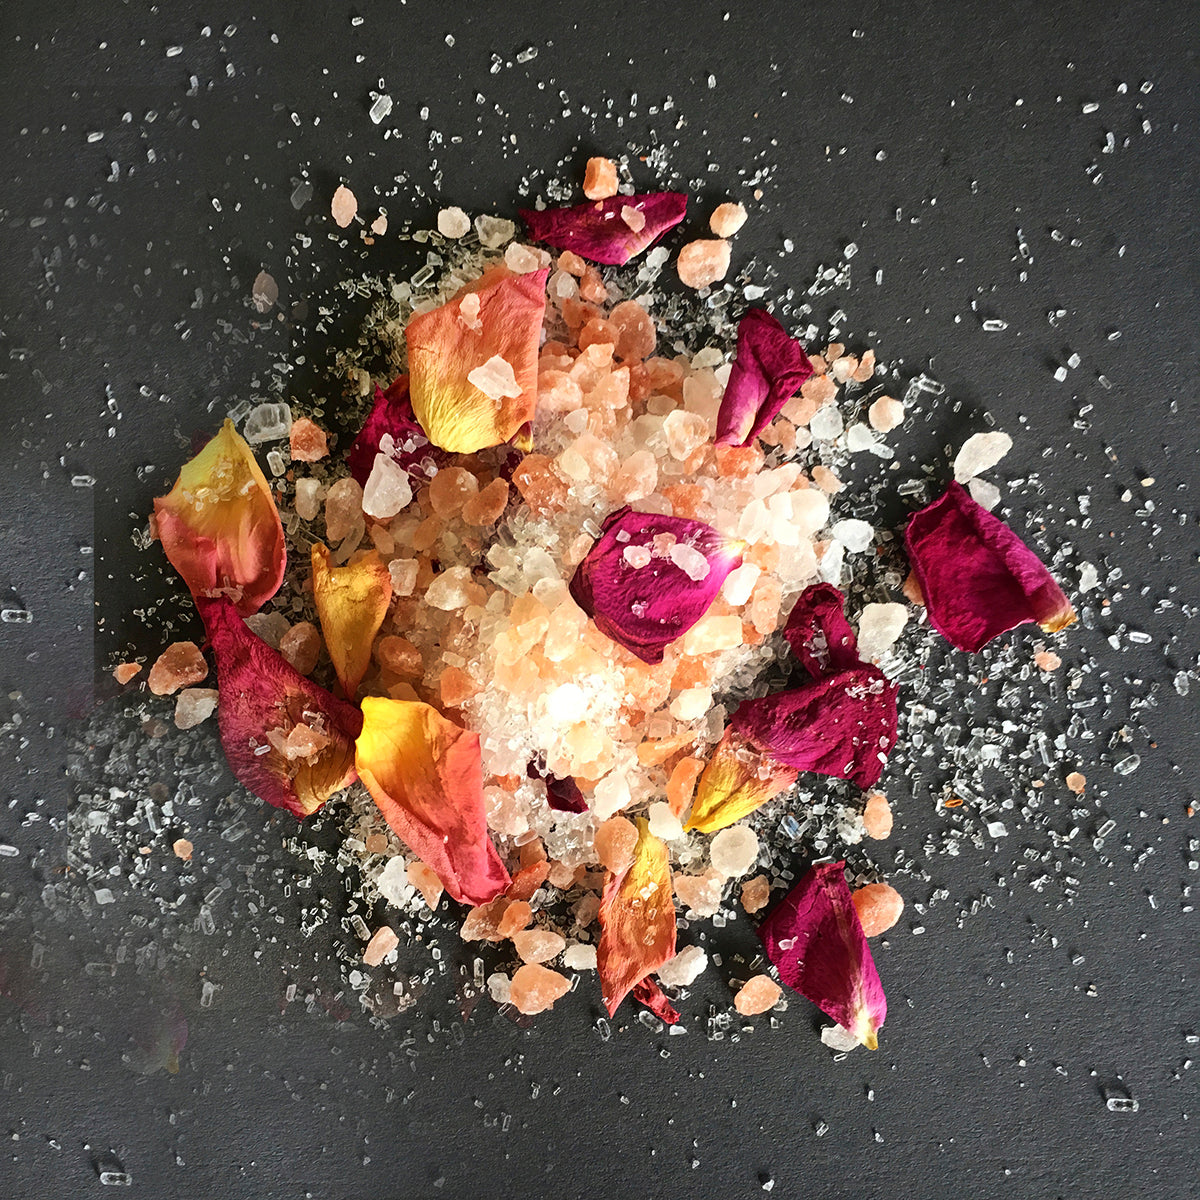  A close-up view of a luxurious mixture of bath salts and dried flower petals arranged on a dark, textured surface. The salt crystals vary in color from clear to peach and amber tones, while the flower petals are rich in color, including shades of deep burgundy, bright yellow, and warm orange. The scattered arrangement gives an impression of a relaxing and aromatic bath experience